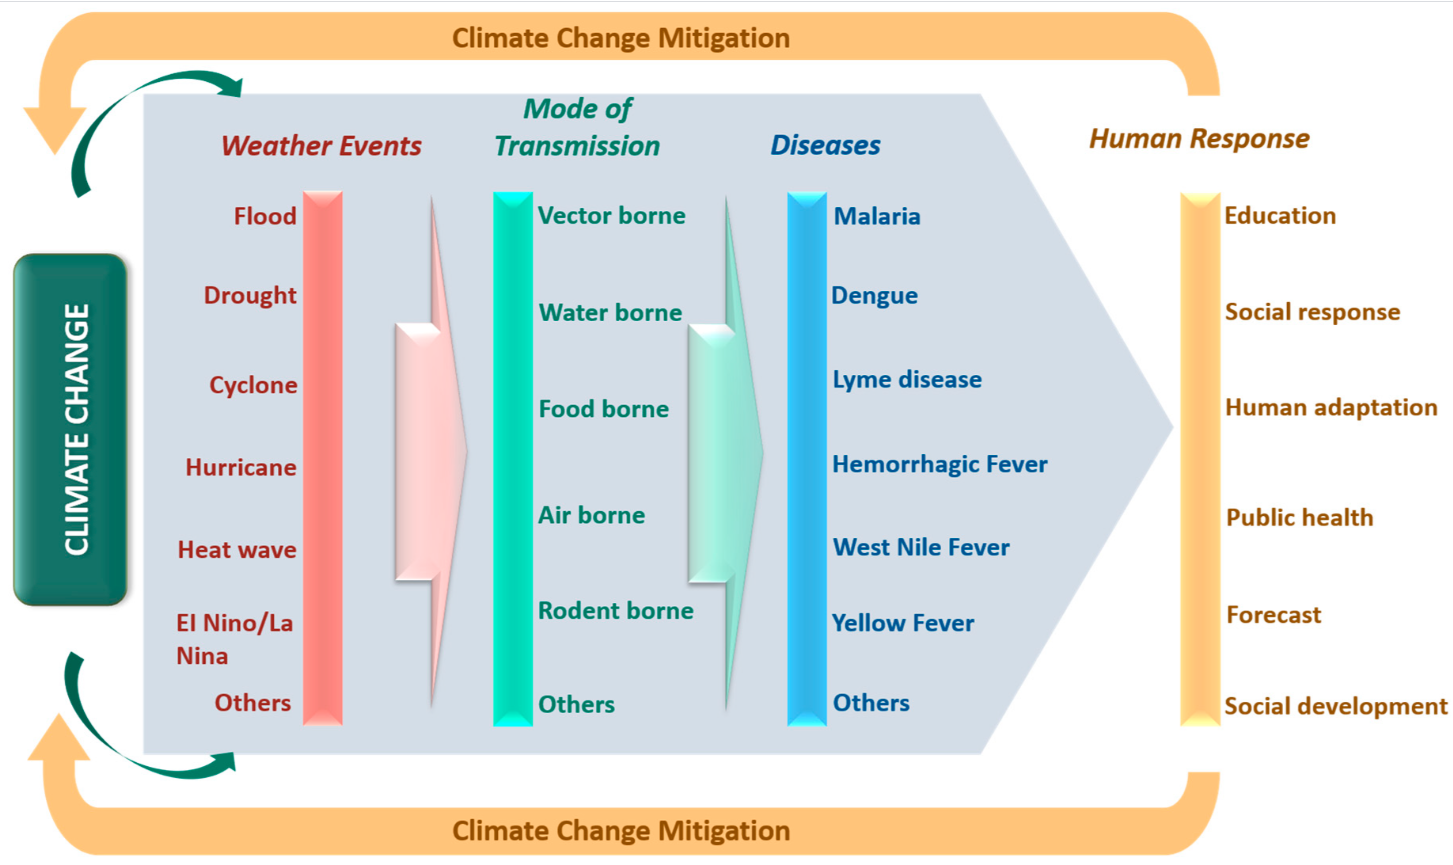 A graph representing the relationships between climate change, extreme weather events and associated diseases with their mode of transmission.